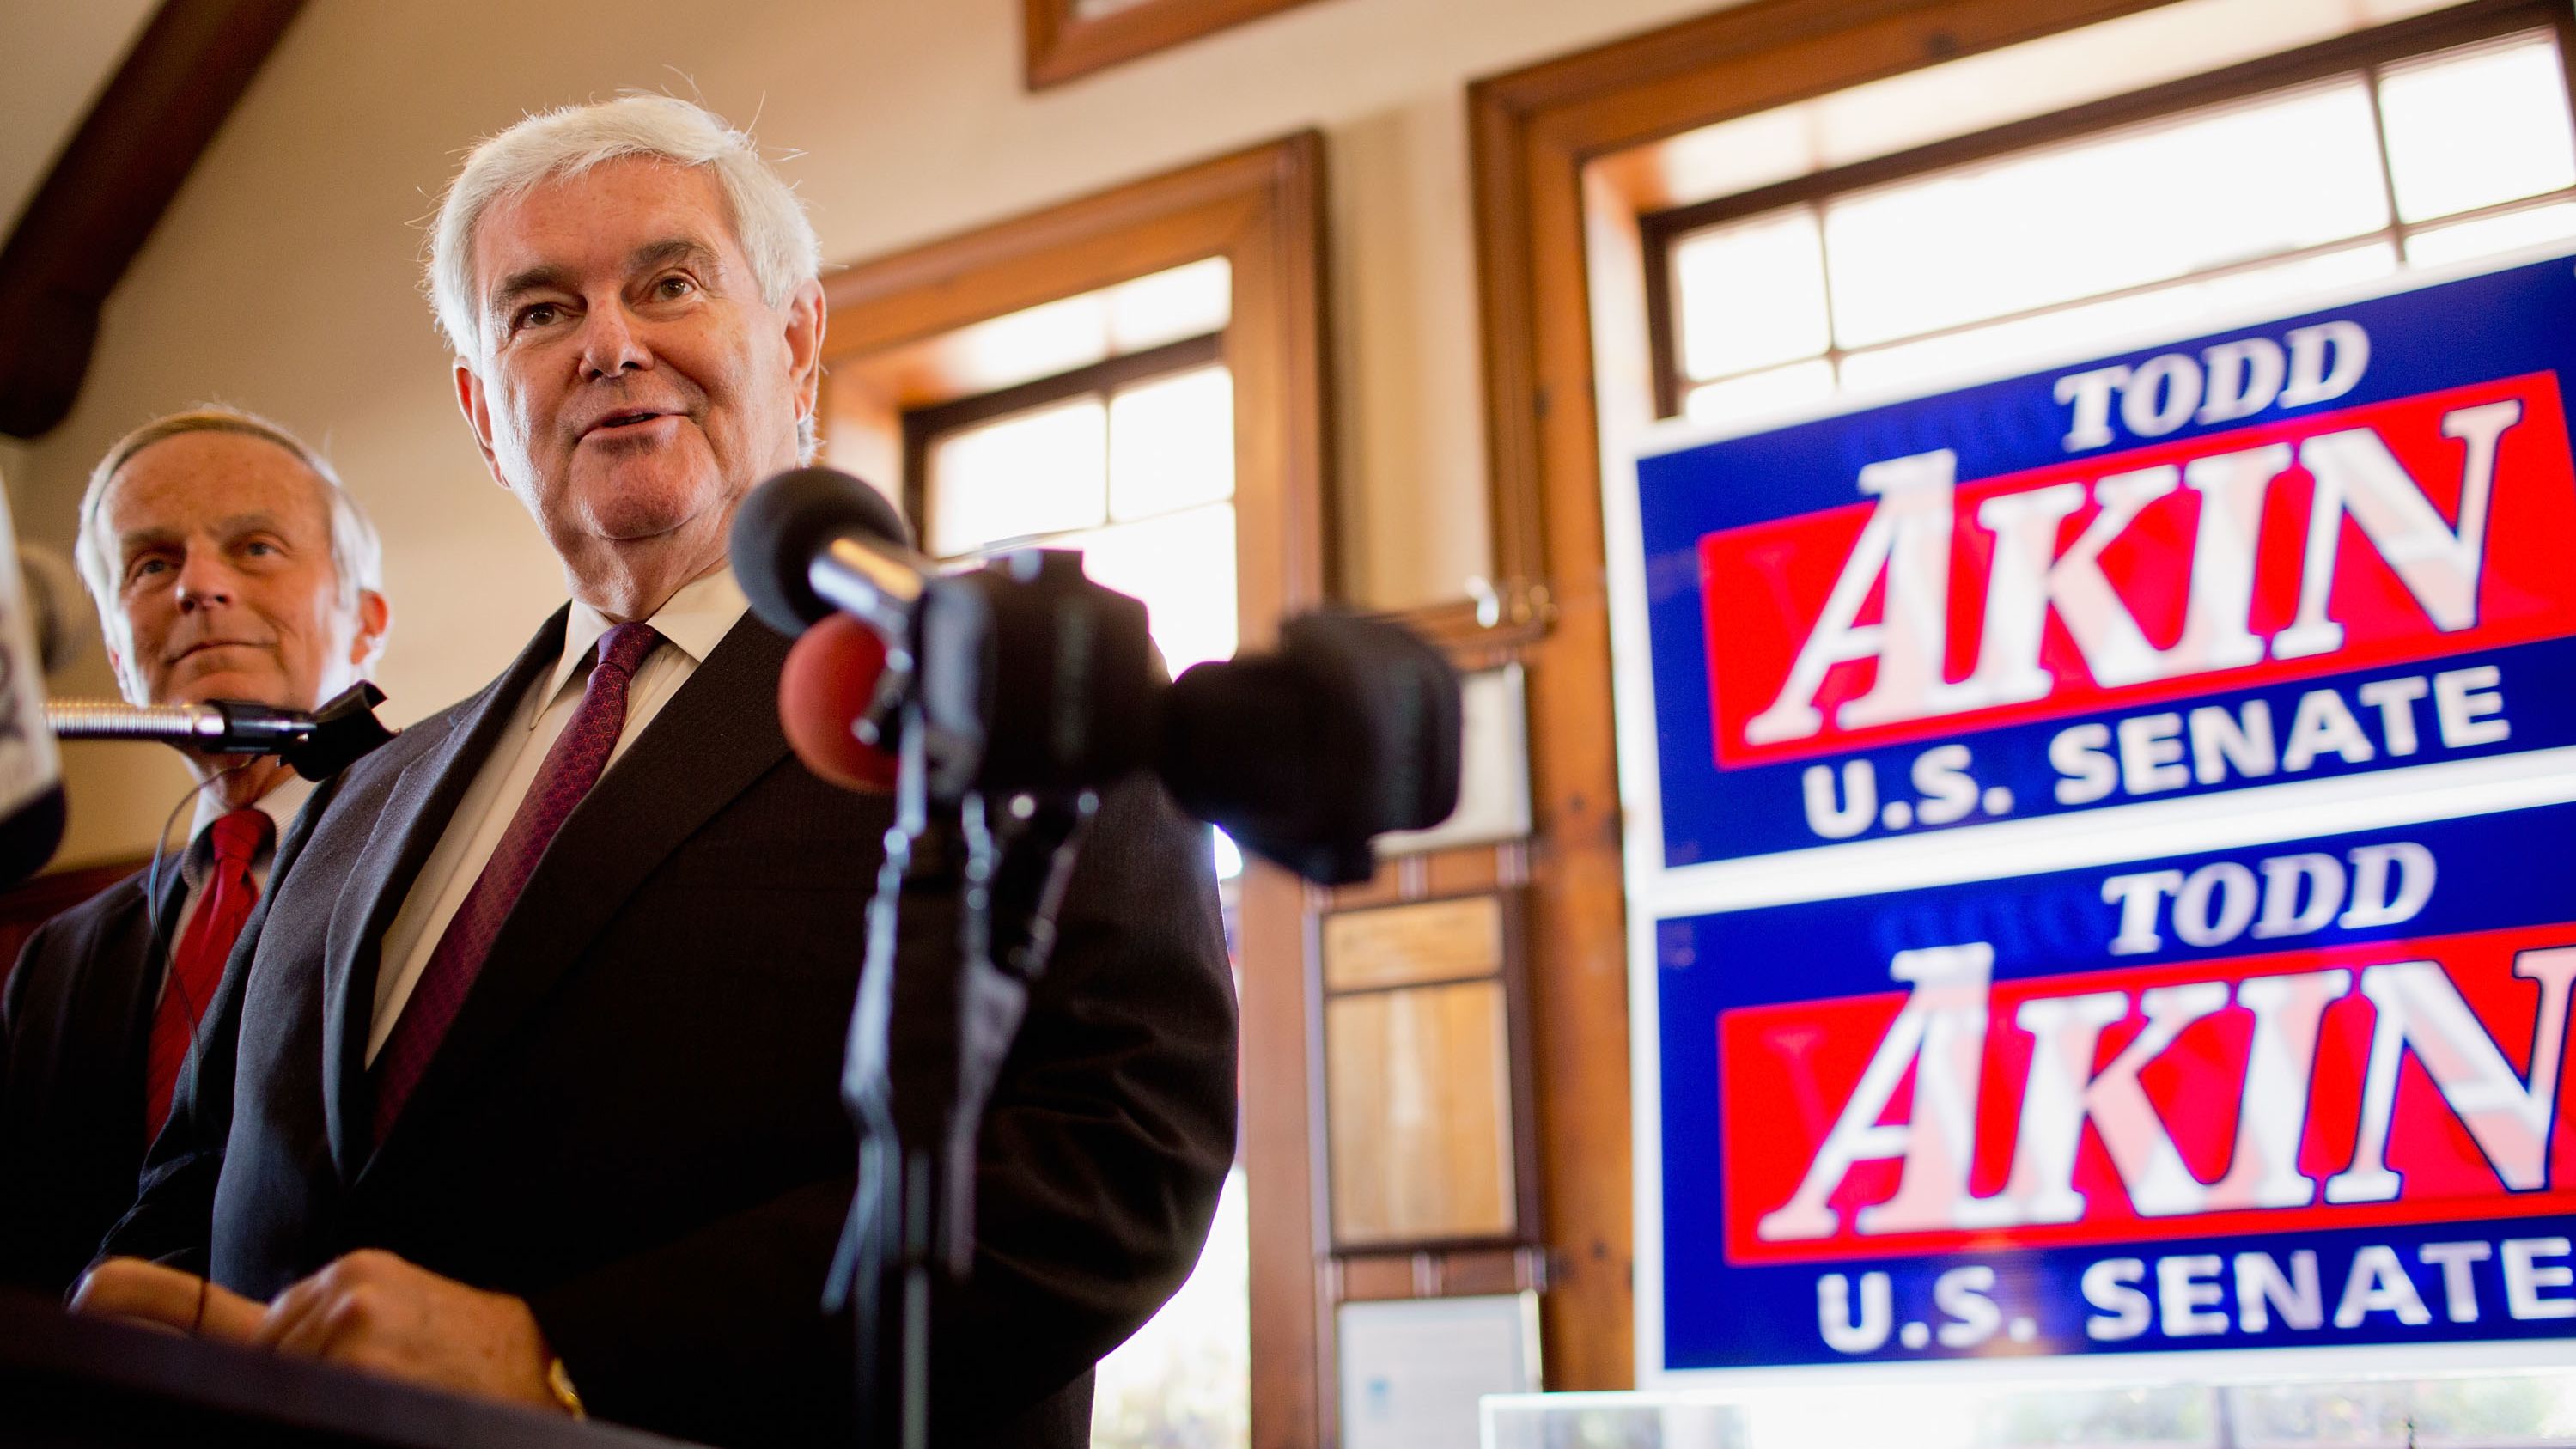 Former House Speaker Newt Gingrich is backing the embattled Senate bid of Rep. Todd Akin, background. 